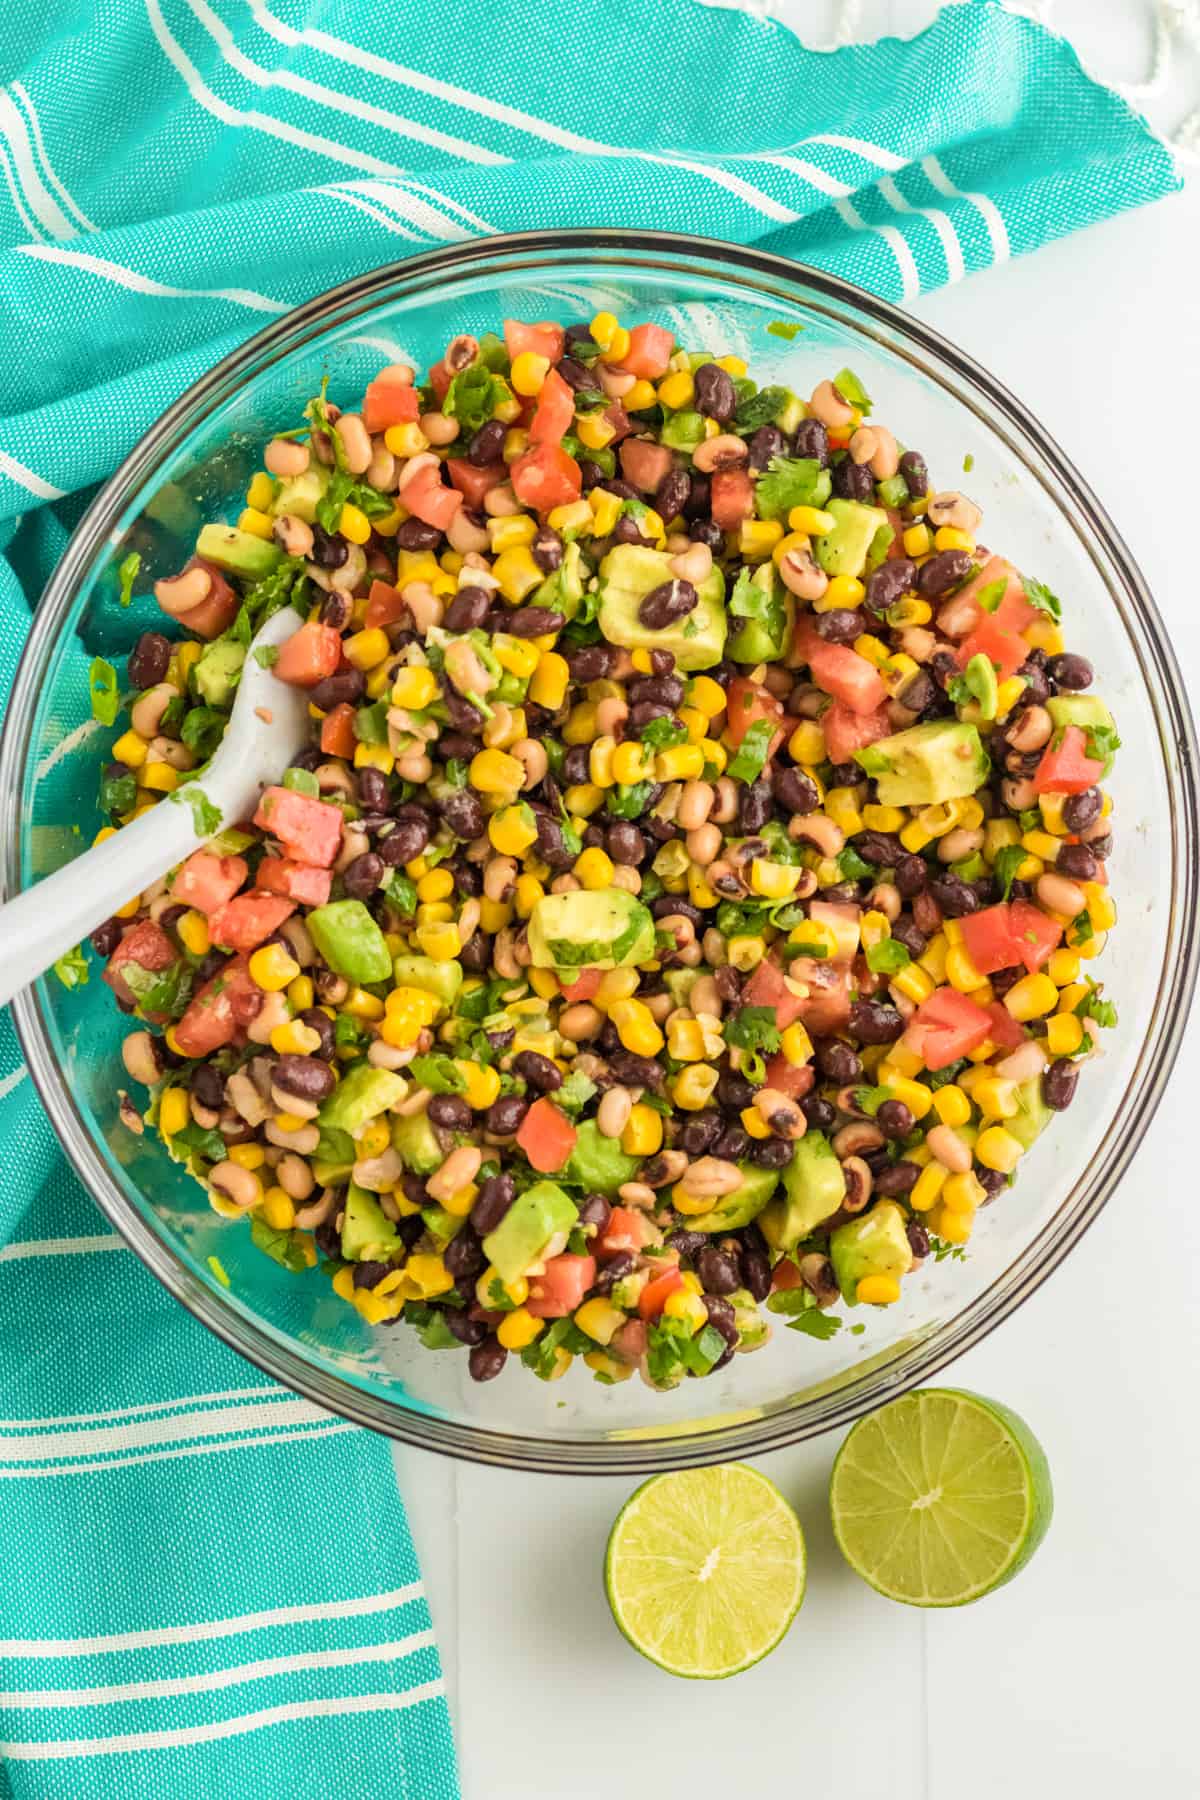 Cowboy caviar in large glass bowl with spoon